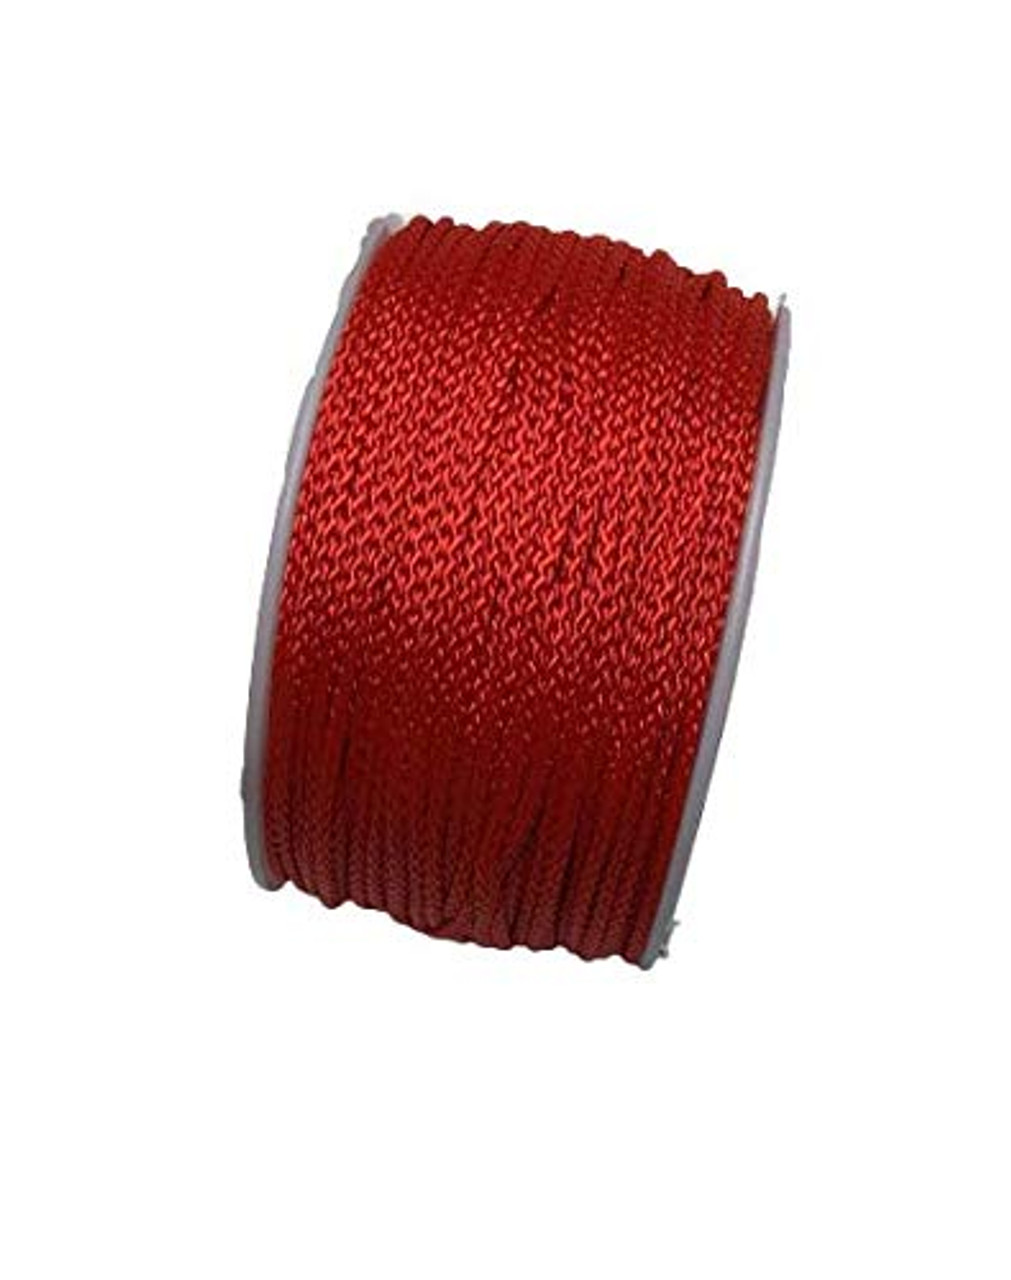 US Ropes Tactical Nylon Micro Cord 1.18mm X 125ft Lightweight Braided Cord  (3/64 Diameter) on Spool Camping Boating Home Fishing Garden Jewelry 90lb